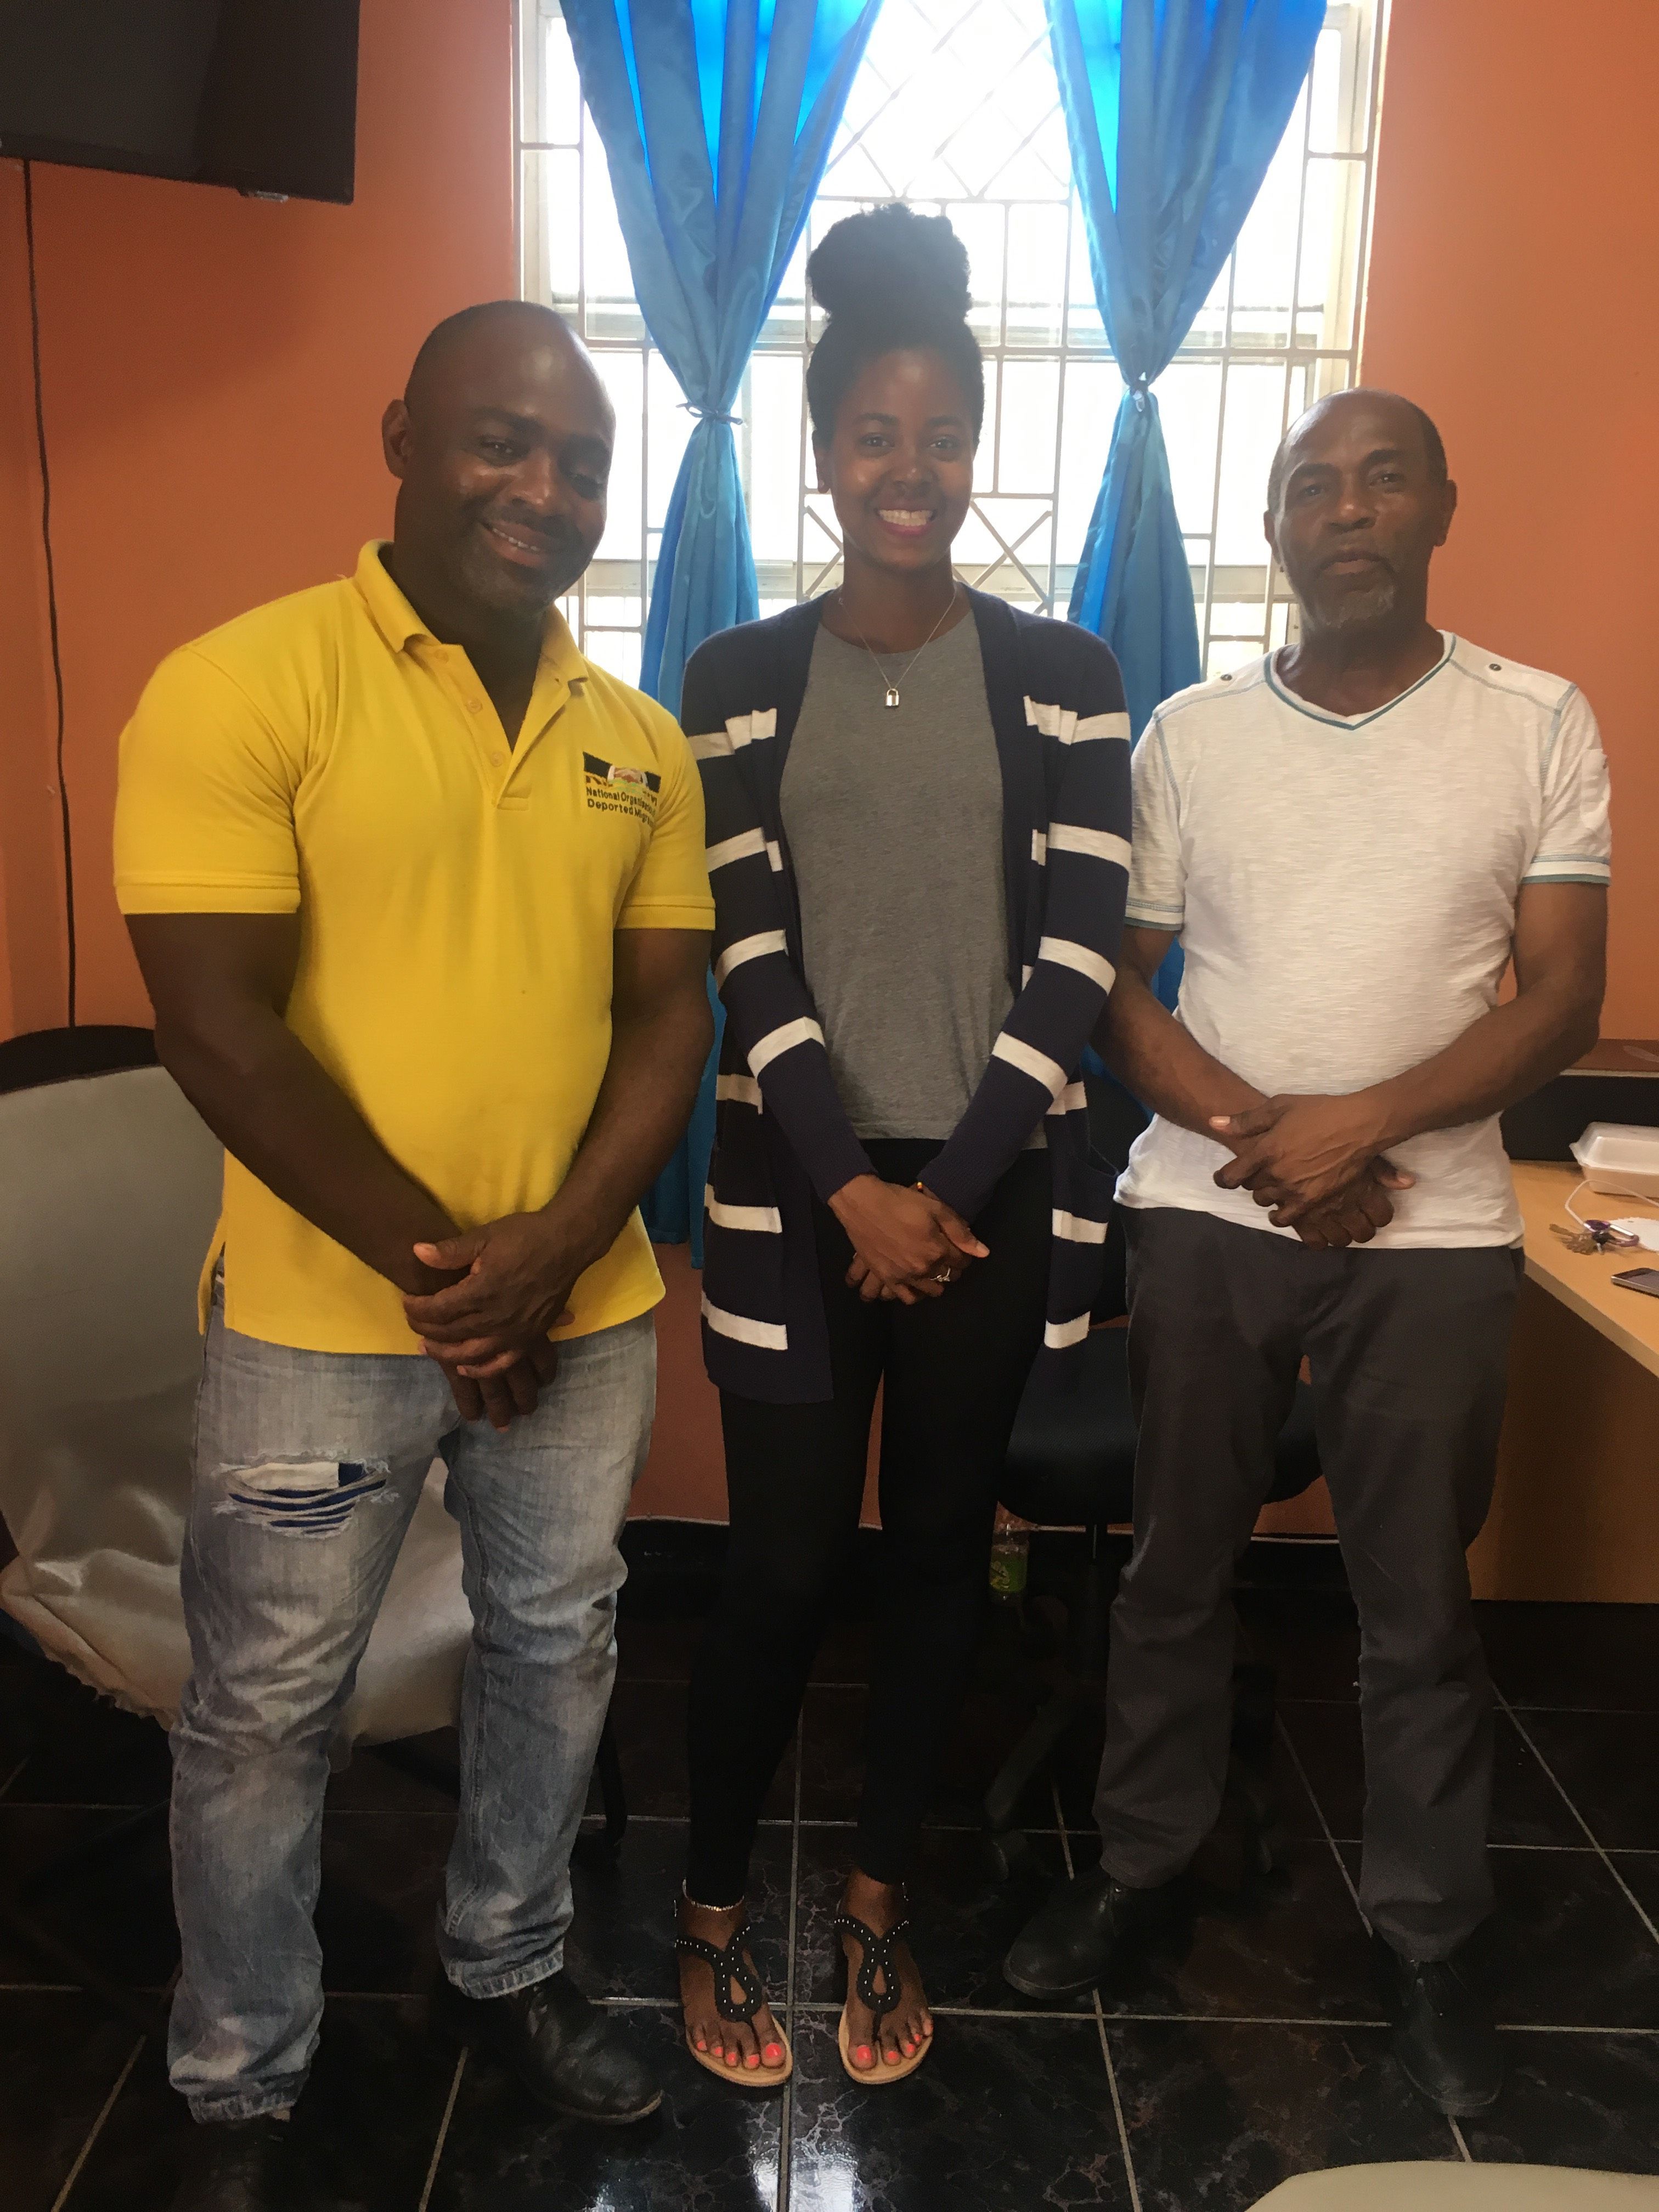 Monica Long (middle) poses alongside The National Organization of Deported Migrants (NODM) President Oswald Dawkins (left) and Treasurer Dwight Jones (right).  Image by NODM Vice President Anjuline Green. Jamaica, 2018.